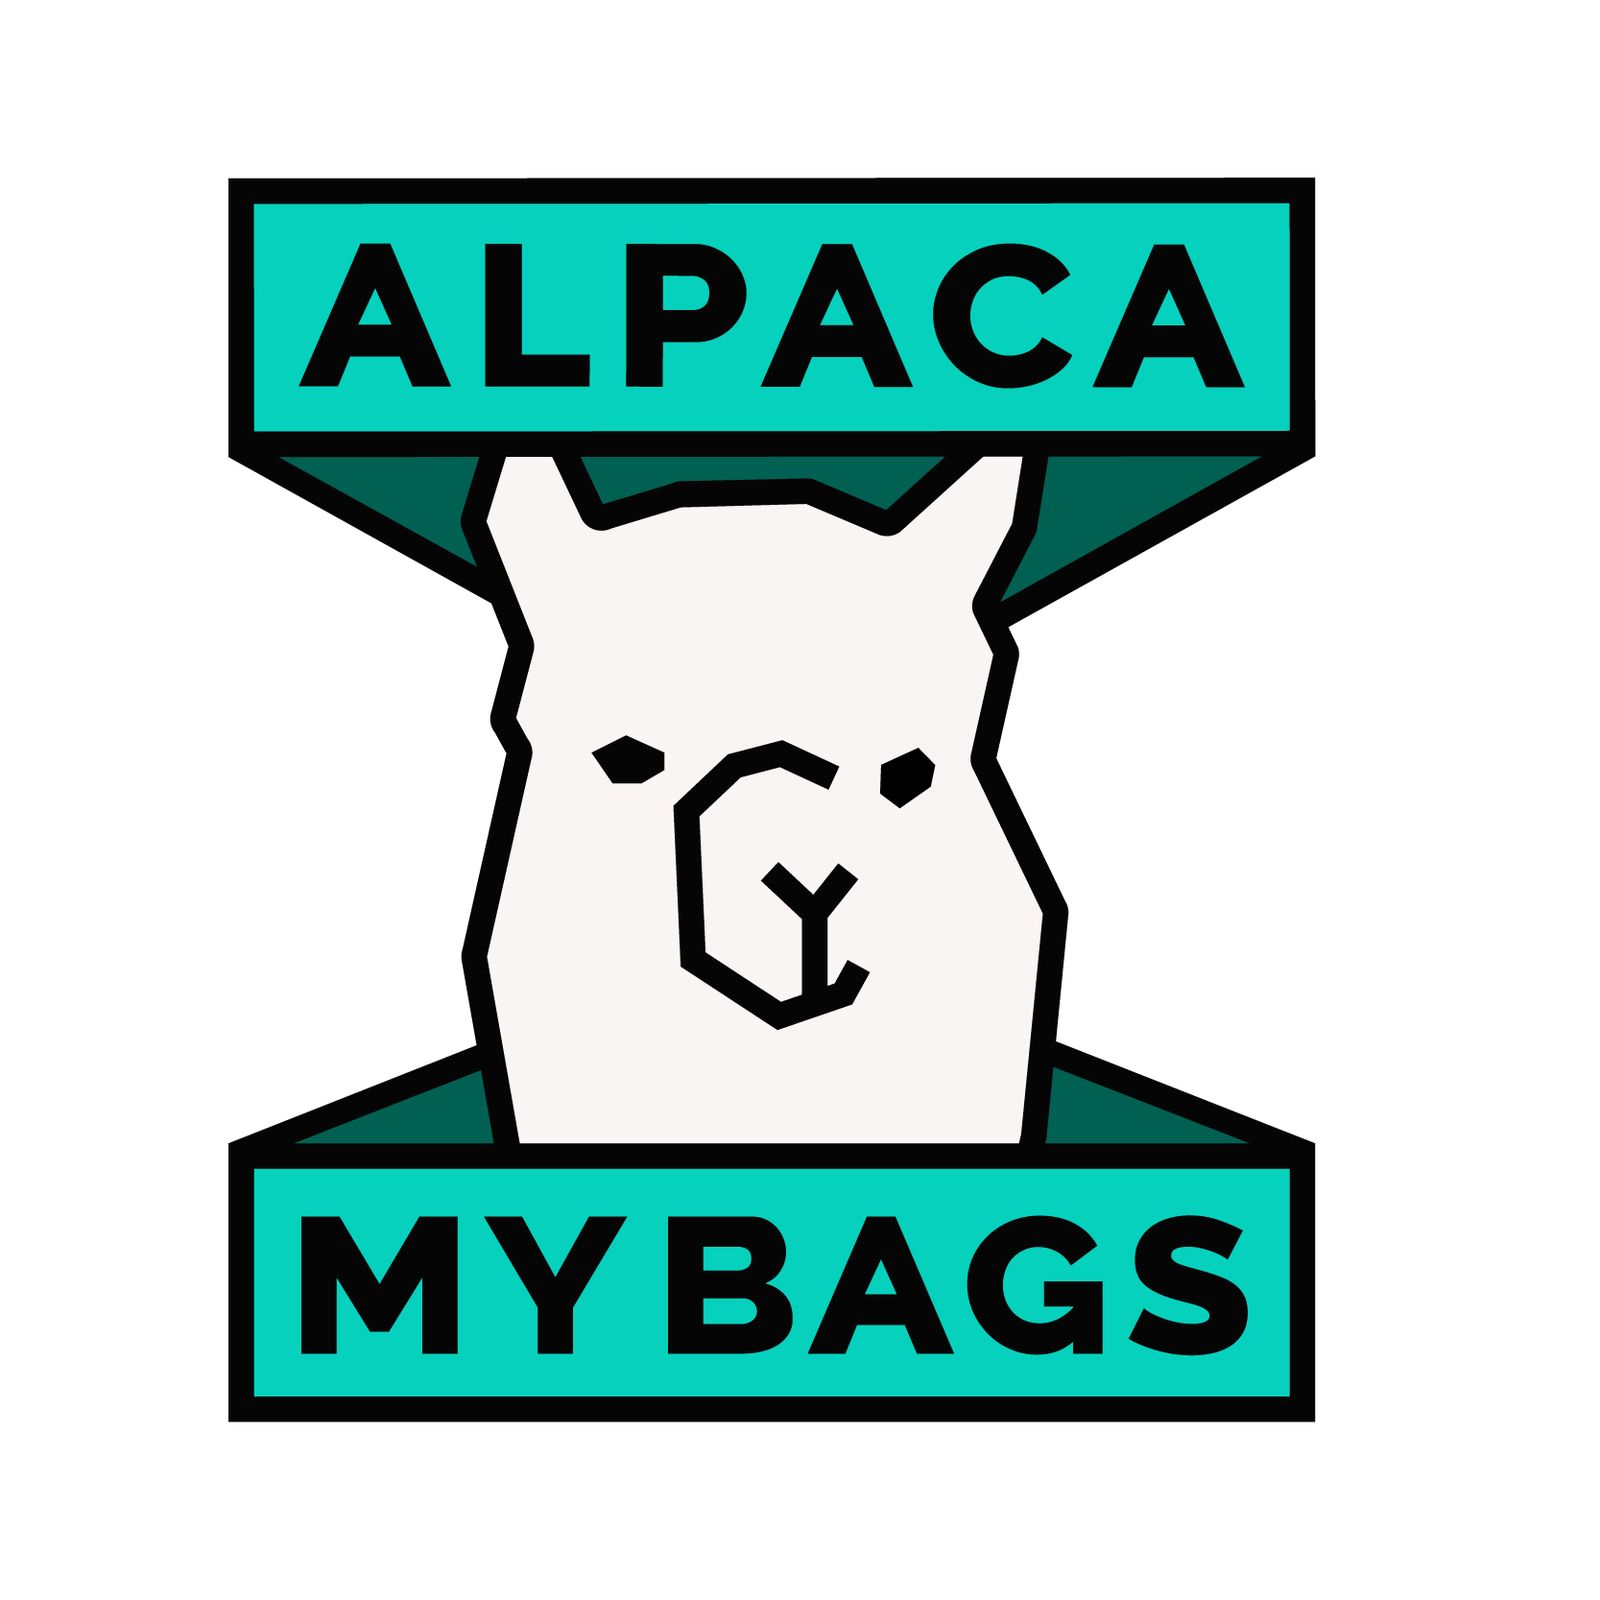 Alpaca My Bags: Responsible Travel Podcast / Morocco: Experiences of Sexism  as a Female Traveler